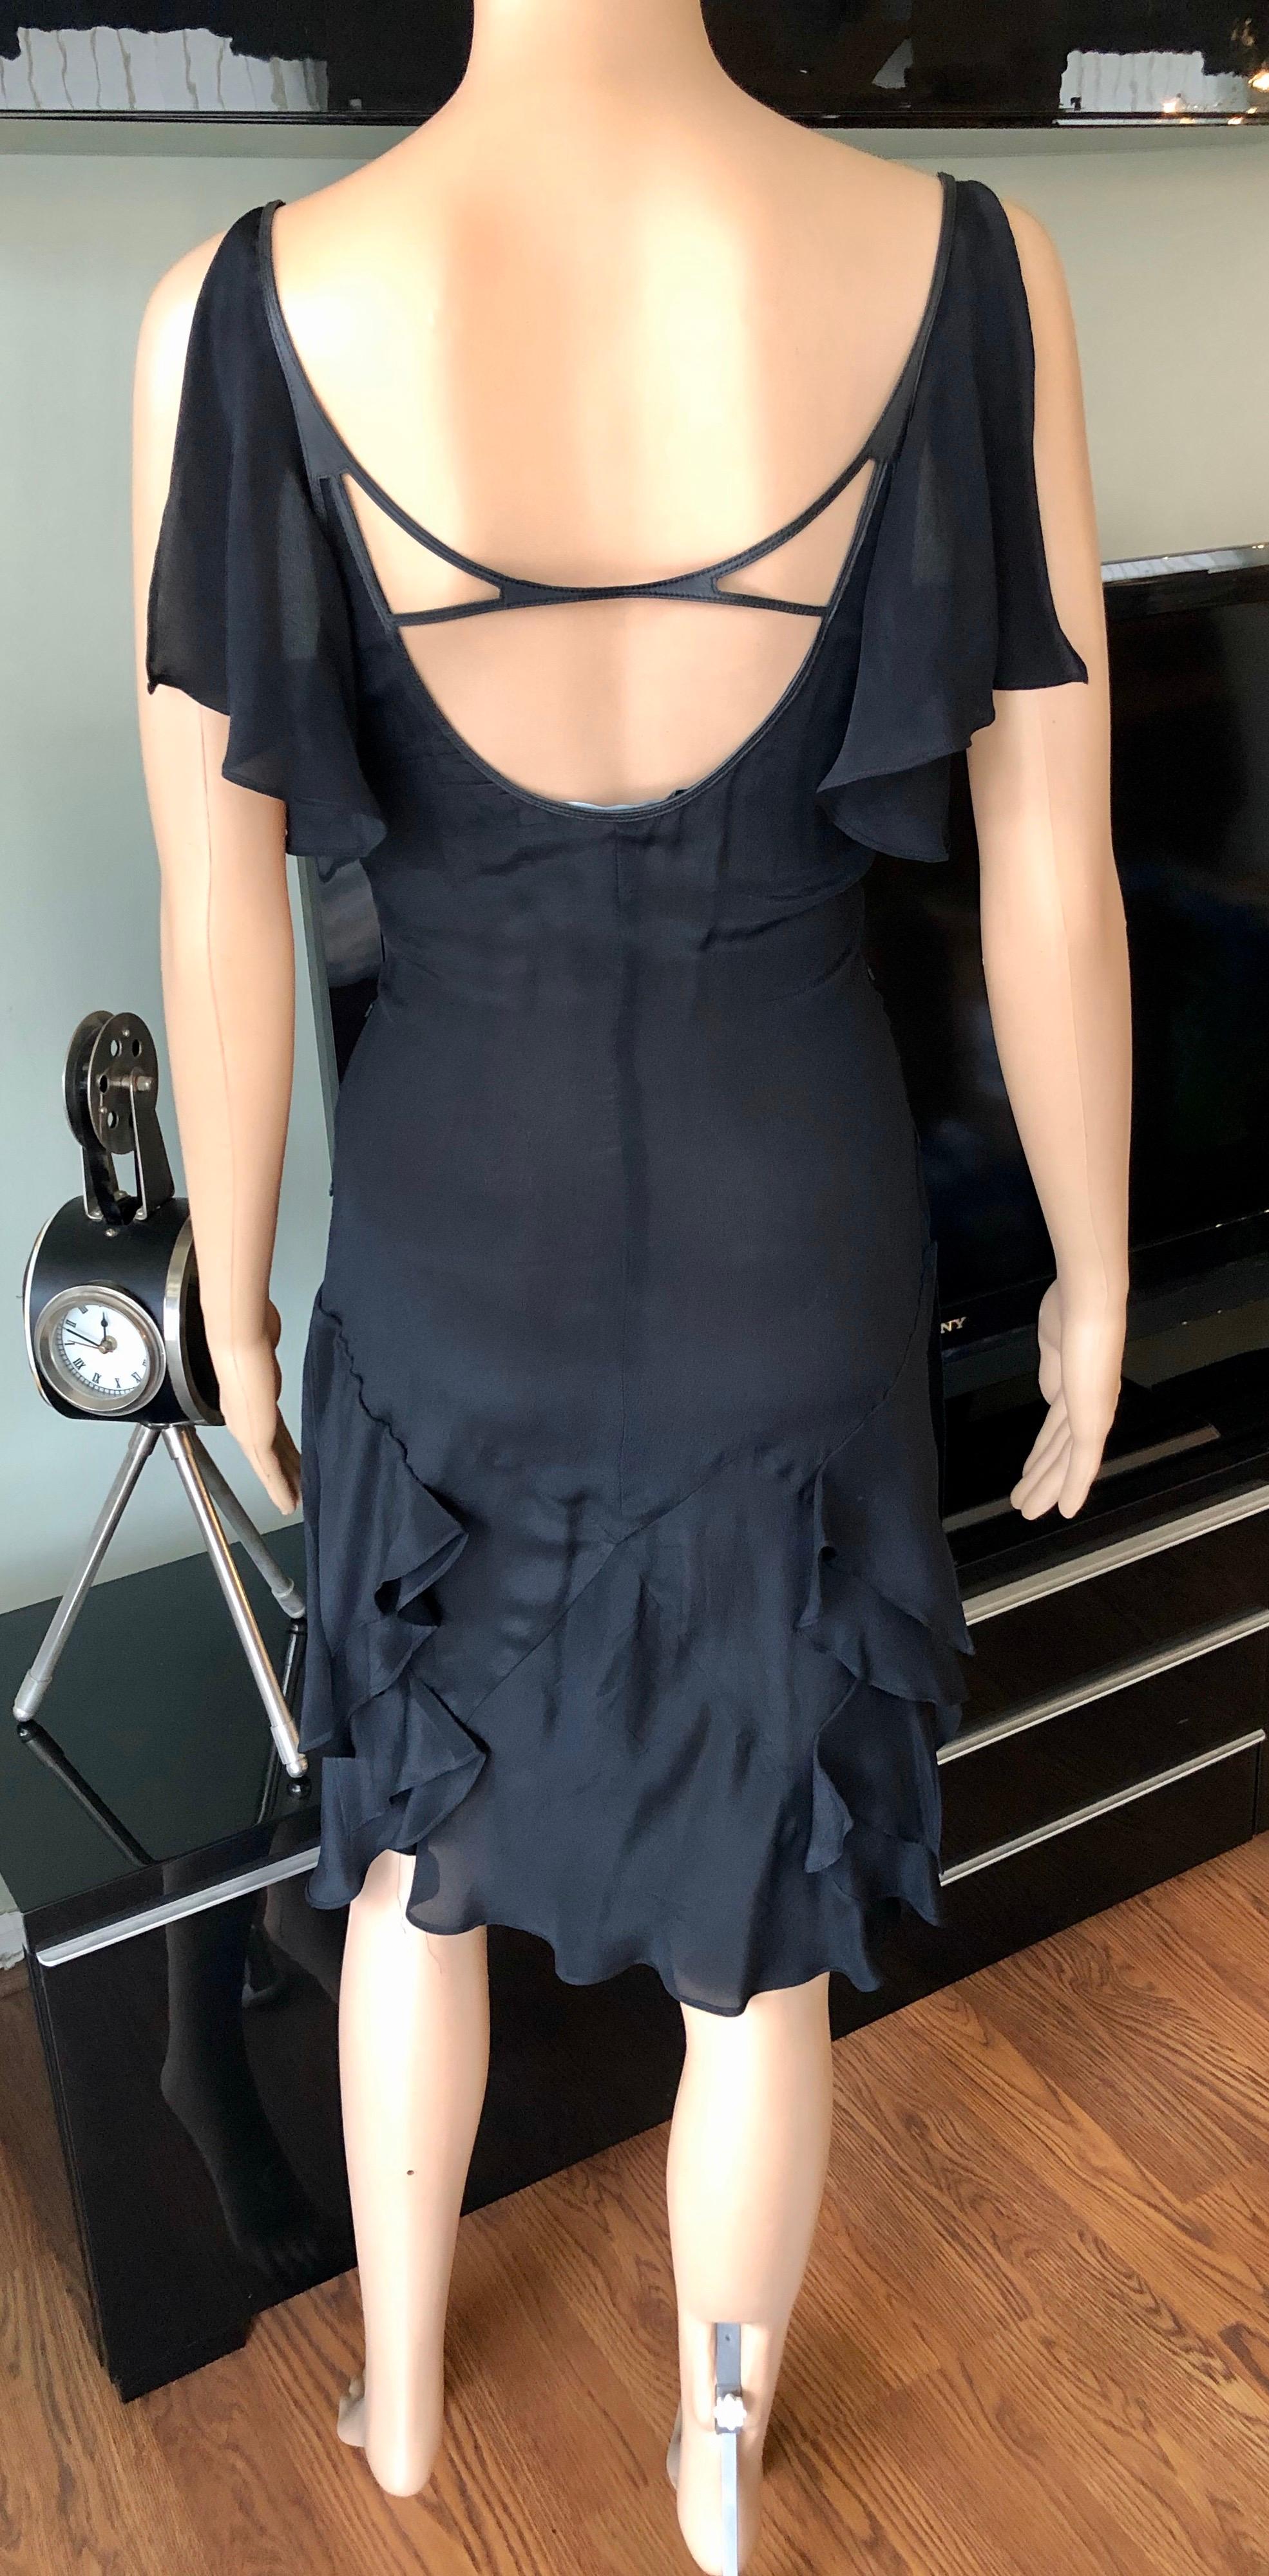 Gucci by Tom Ford S/S 2004 Cutout Plunged Neckline Black Dress IT 40

Gucci sleeveless black knee-length dress featuring ruffled shoulders, cutouts at front and back and concealed zip closure at side. Fabric tag has been removed.